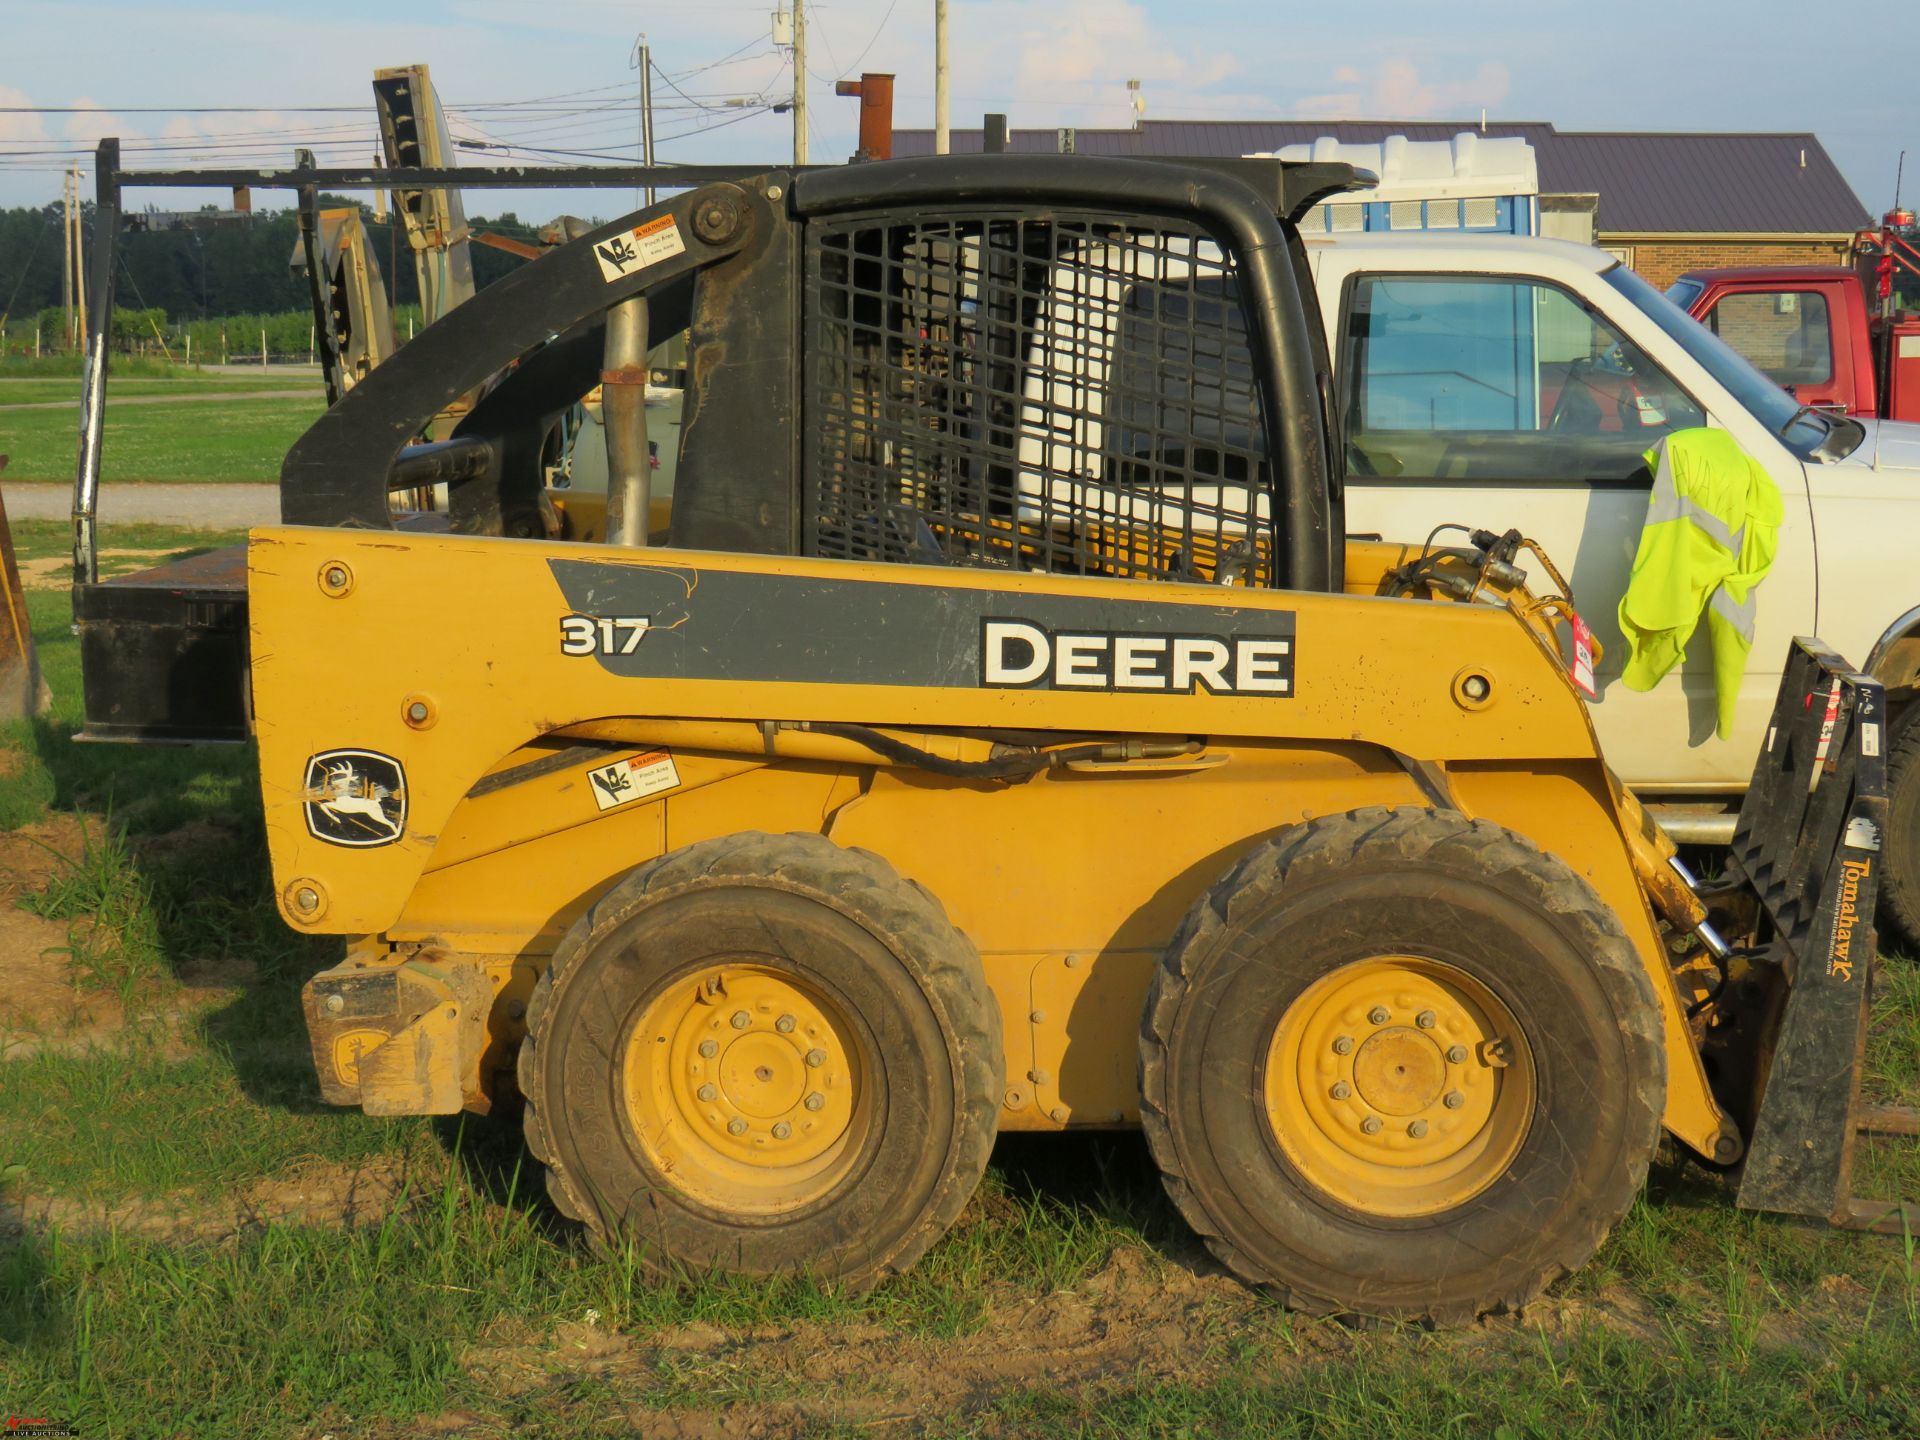 JOHN DEERE 317 RUBBER TIRE SKID STEER, AUXILIARY HYDRAULICS, 12-16.5 TIRES, REAR WEIGHTS, 2972 HOURS